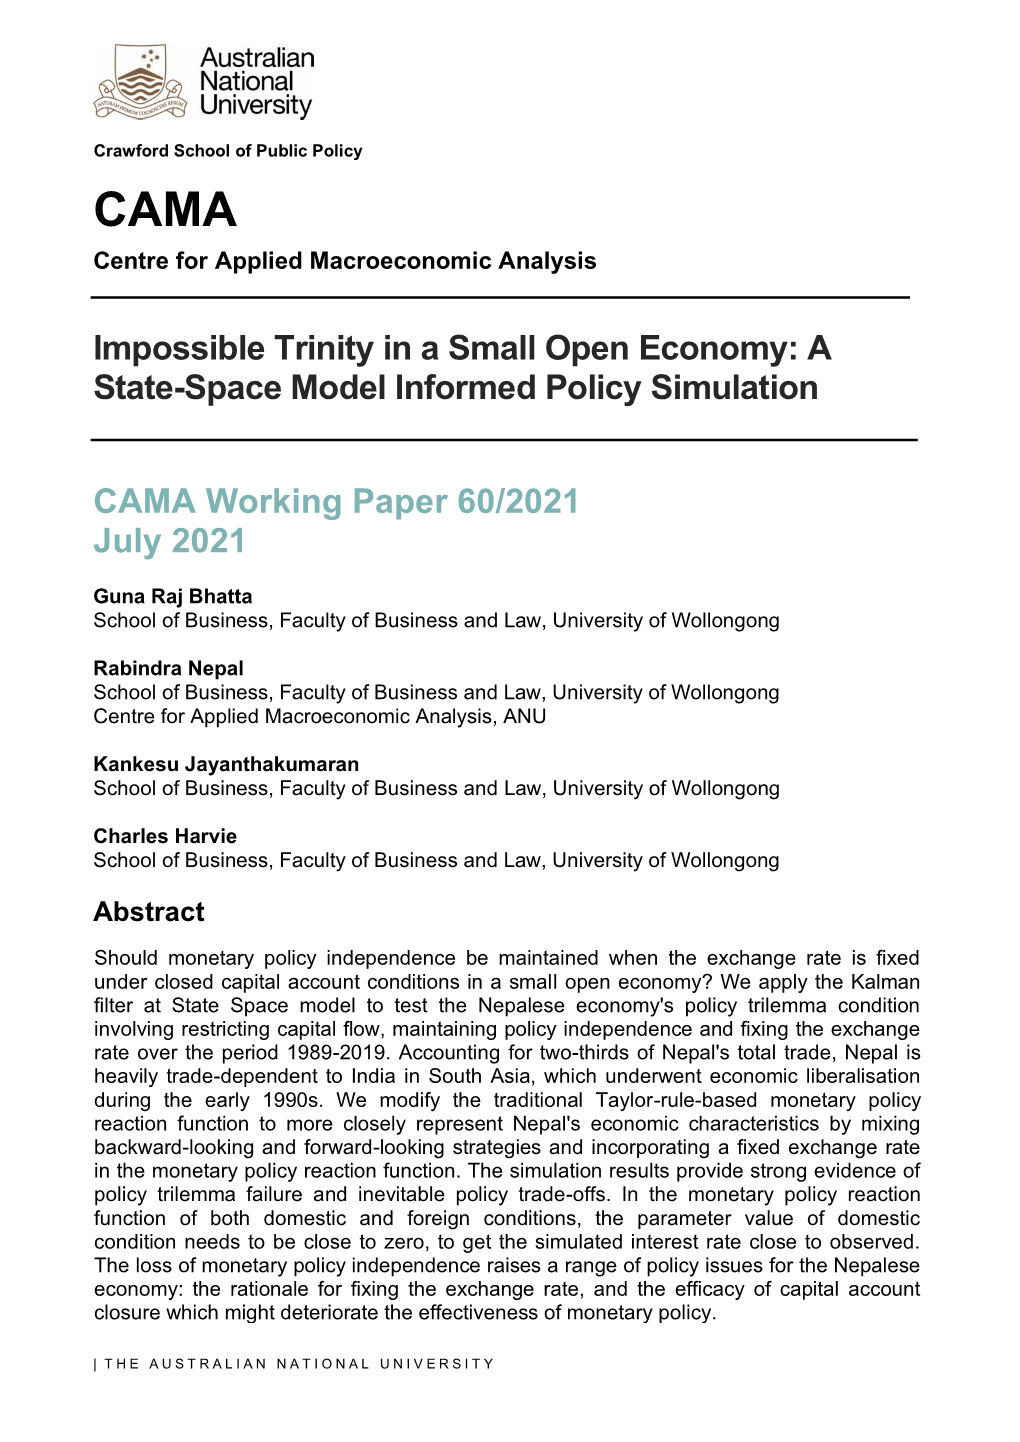 Impossible Trinity in a Small Open Economy: a State-Space Model Informed Policy Simulation